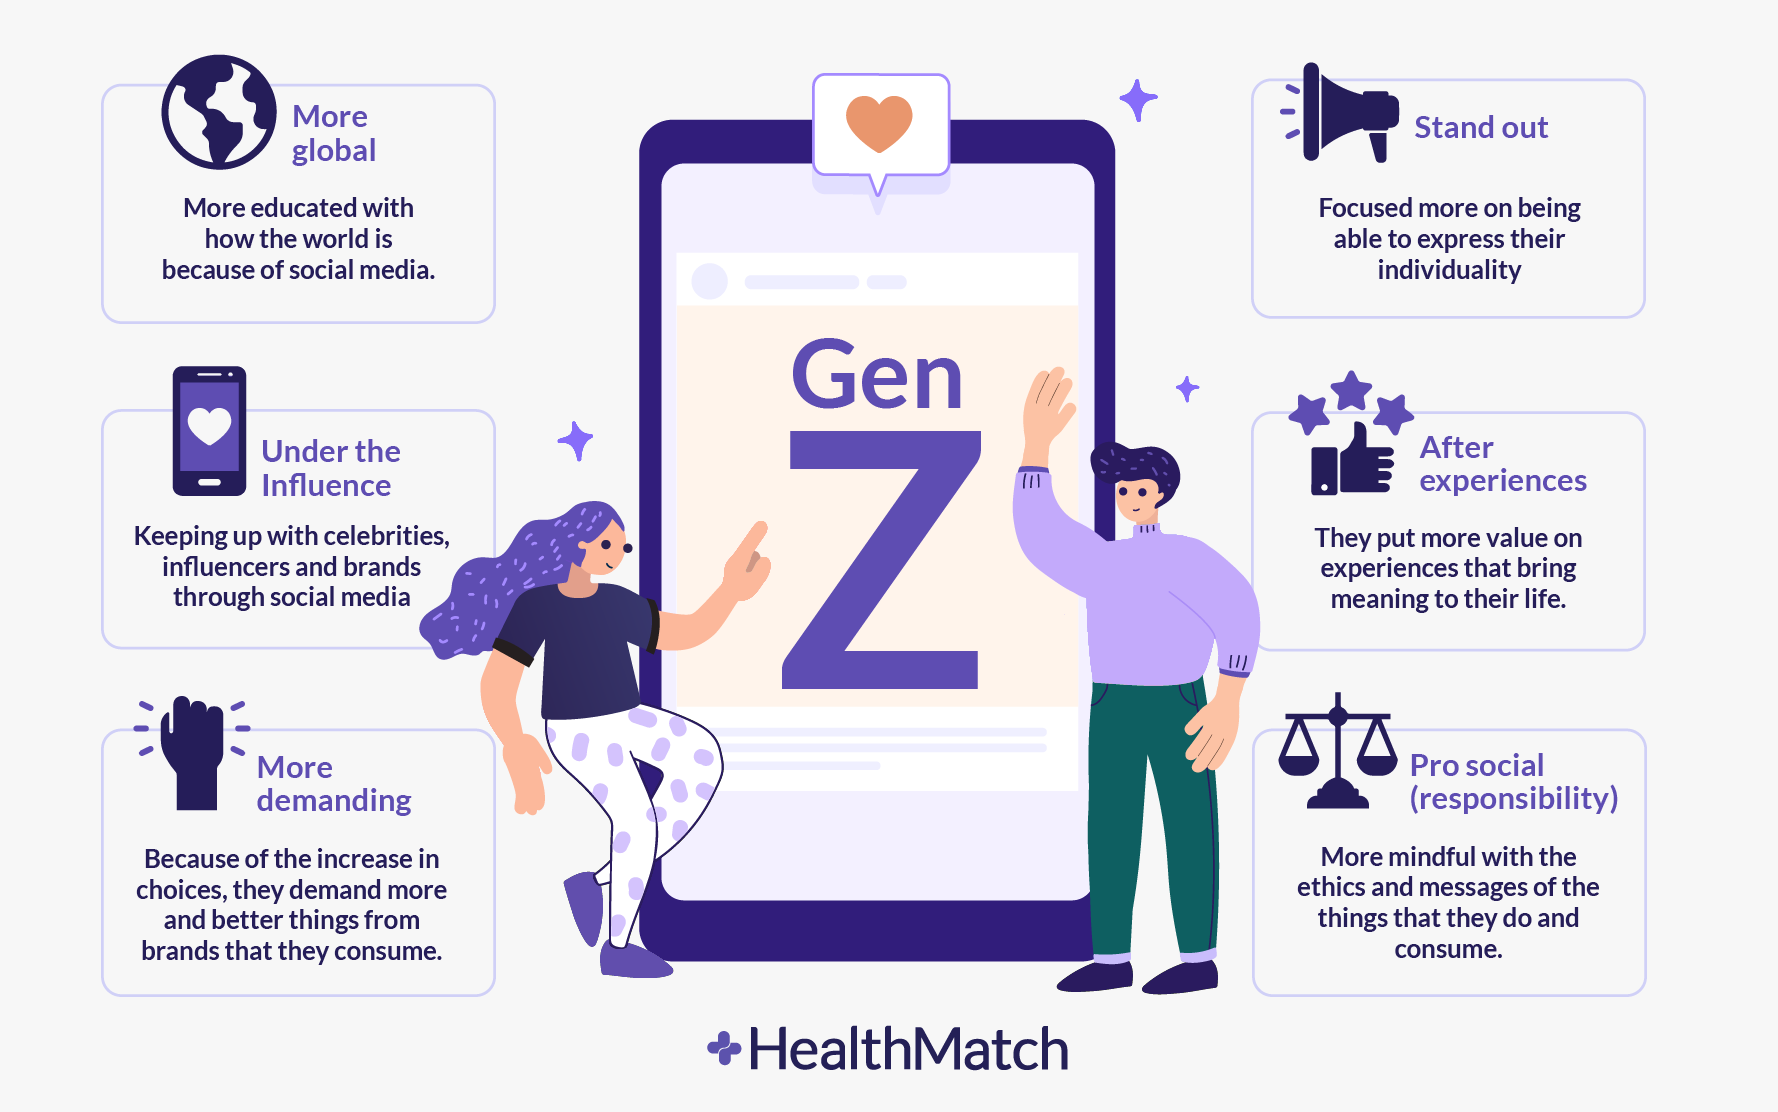 HealthMatch - Gen Mental Health wave - what causing the surge?